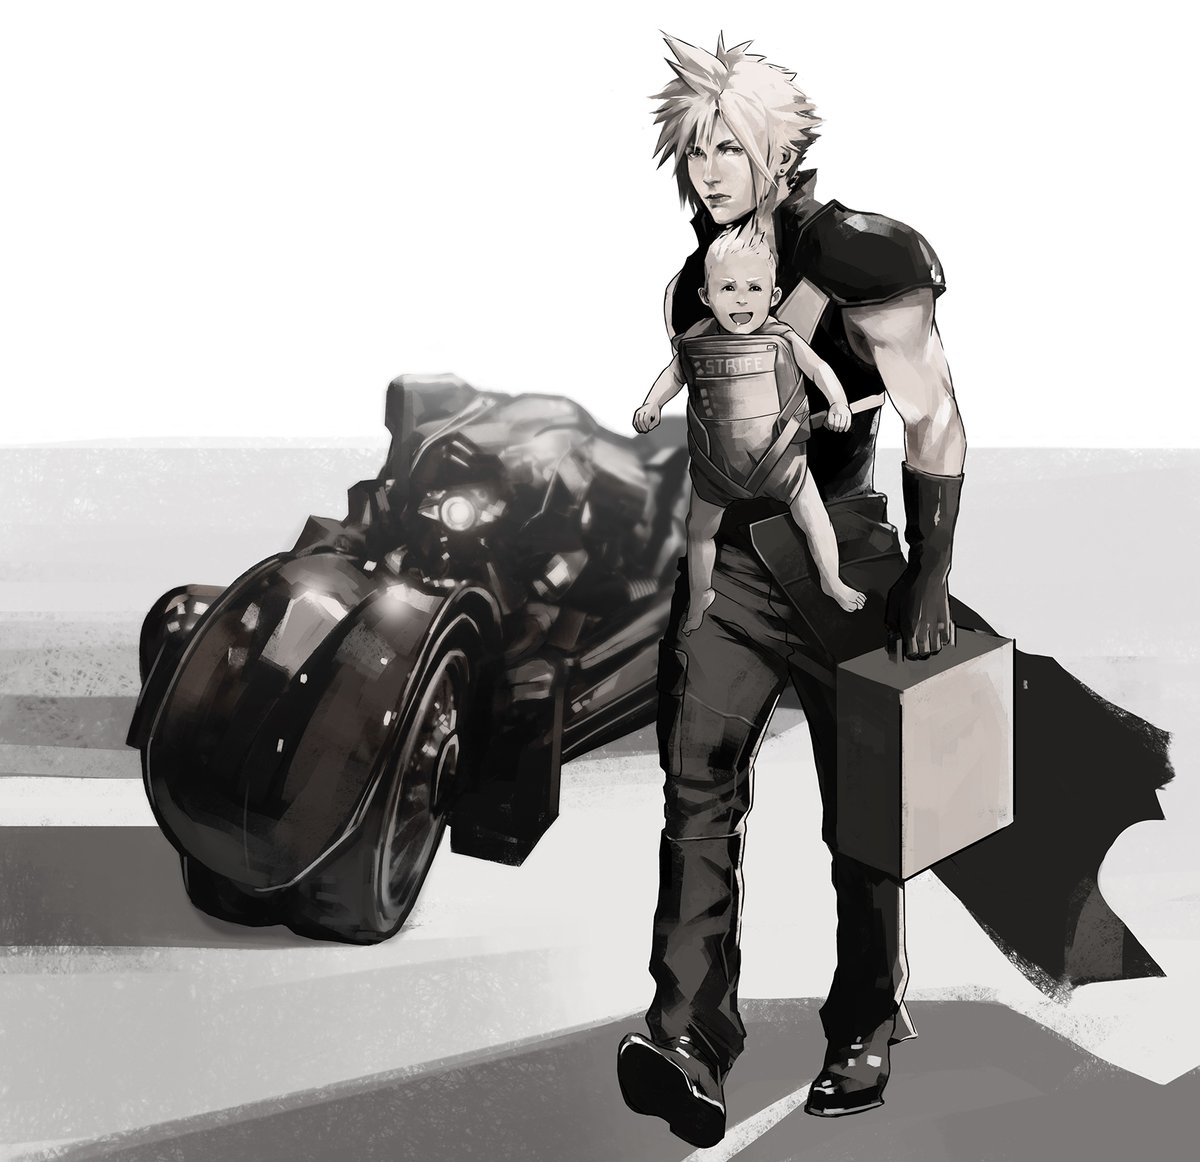 Hi guys! Thank you for the overwhelming support. I've read everyone's comments and I really appreciate them! So here's another dadCloud to keep the series going. New and improved Strife delivery service 😂 #Cloti #Cloudstrife #FF7